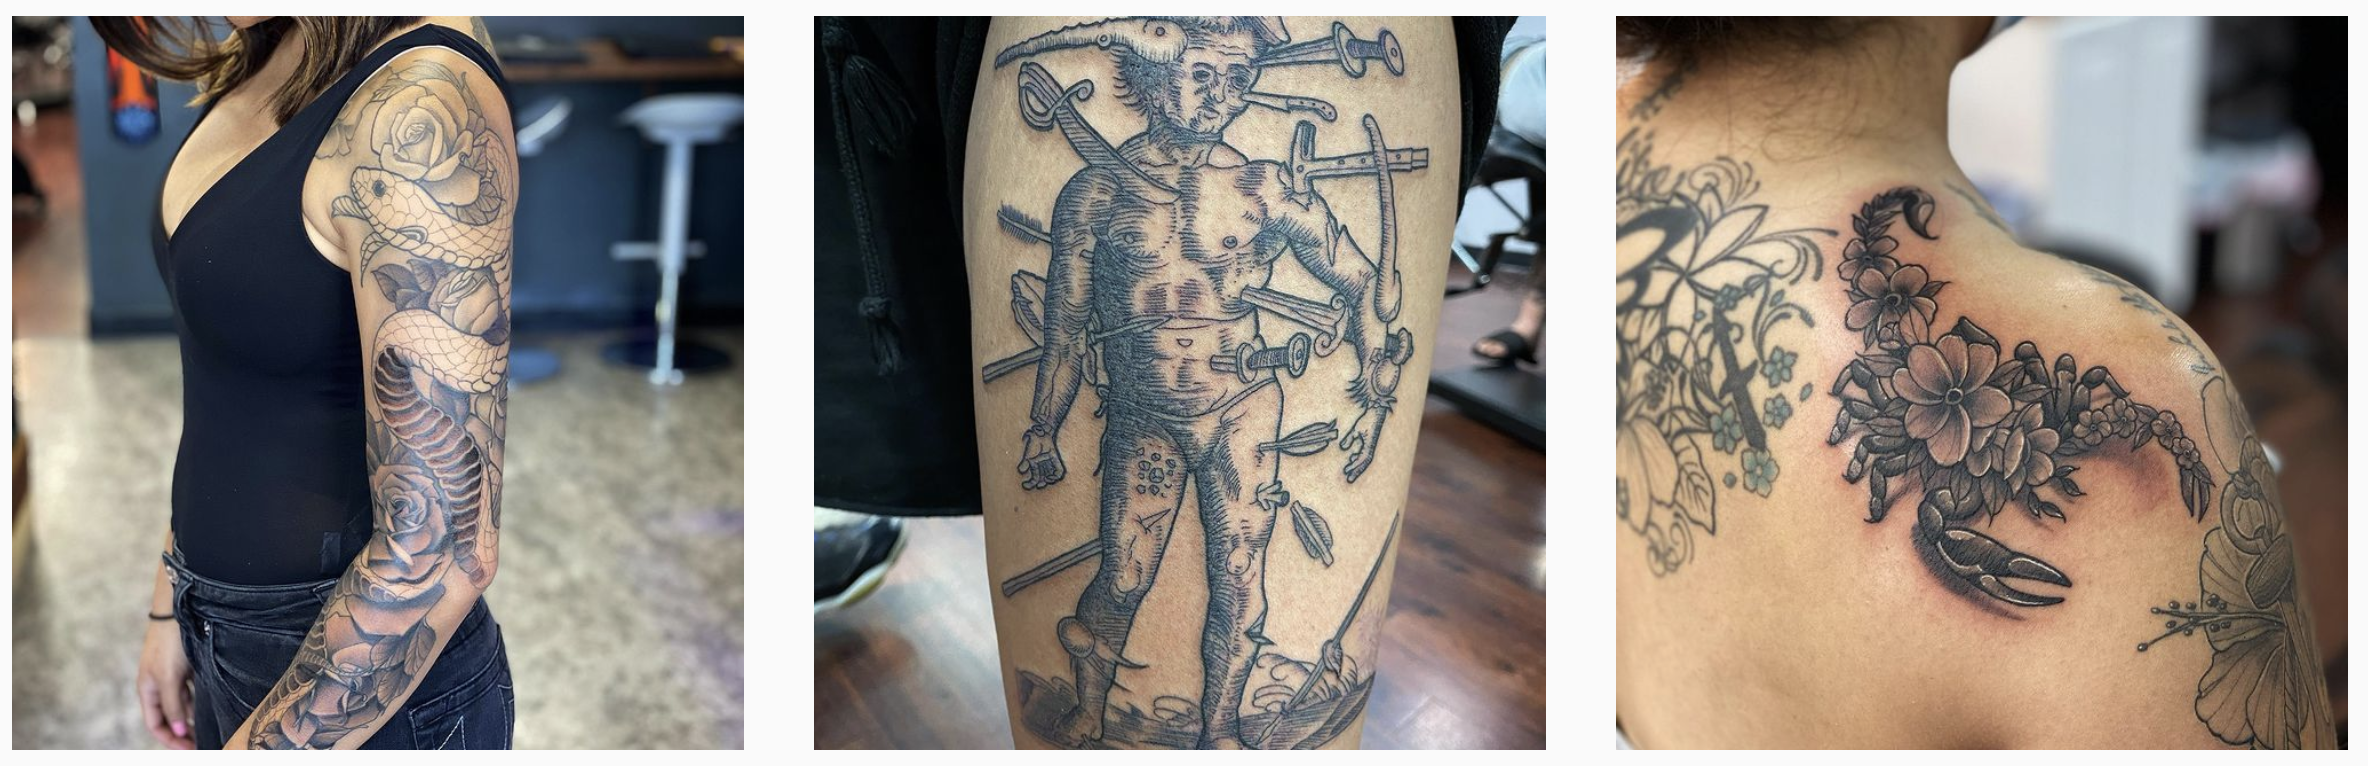 7th Bay Area Convention of the Tattoo Arts | Tattoofilter